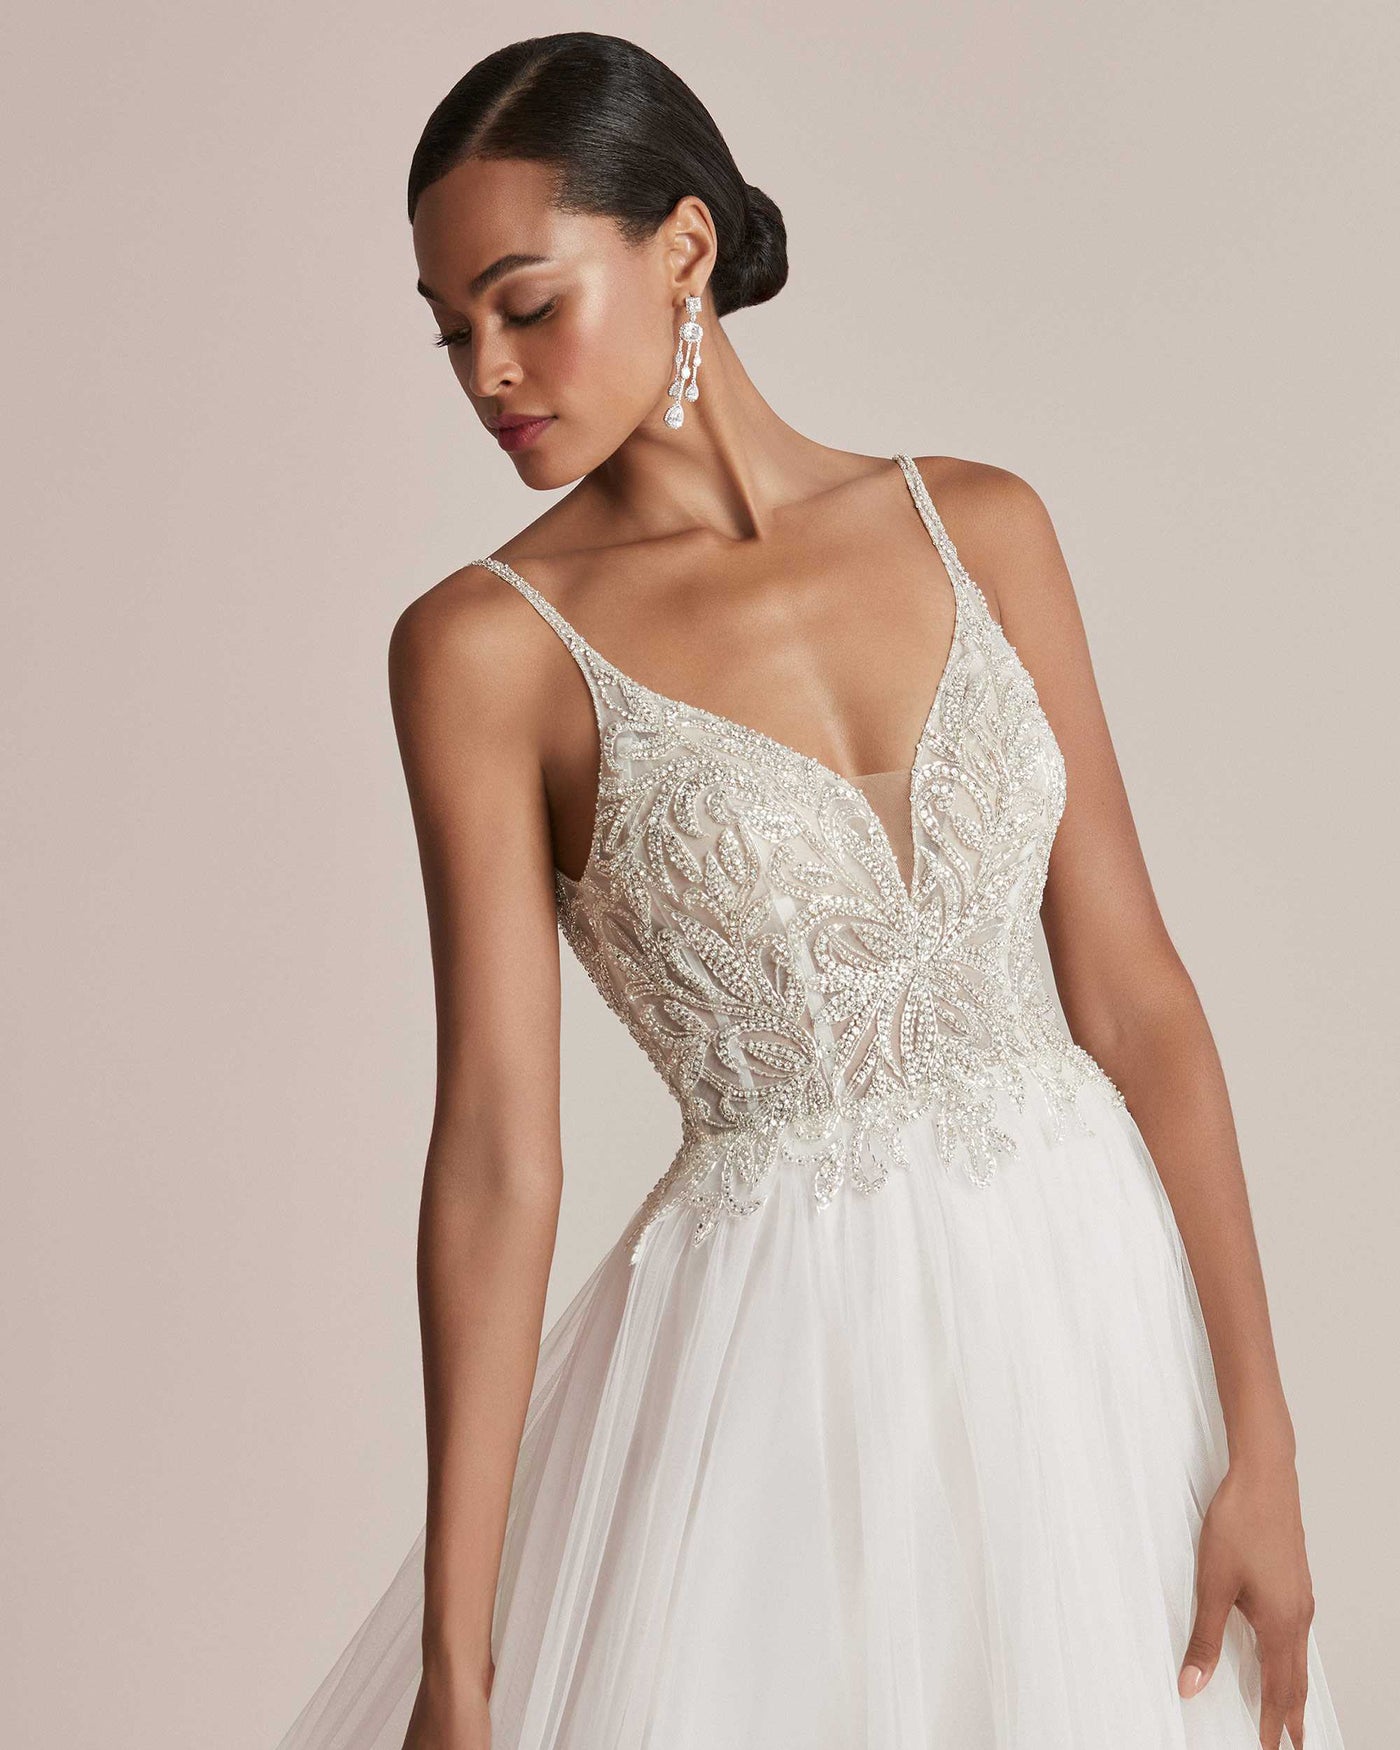 A woman models an elegant Justin Alexander Cady Dress - Off The Rack from Bergamot Bridal with intricate beading on the bodice and a flowing tulle skirt. She wears sparkling earrings.